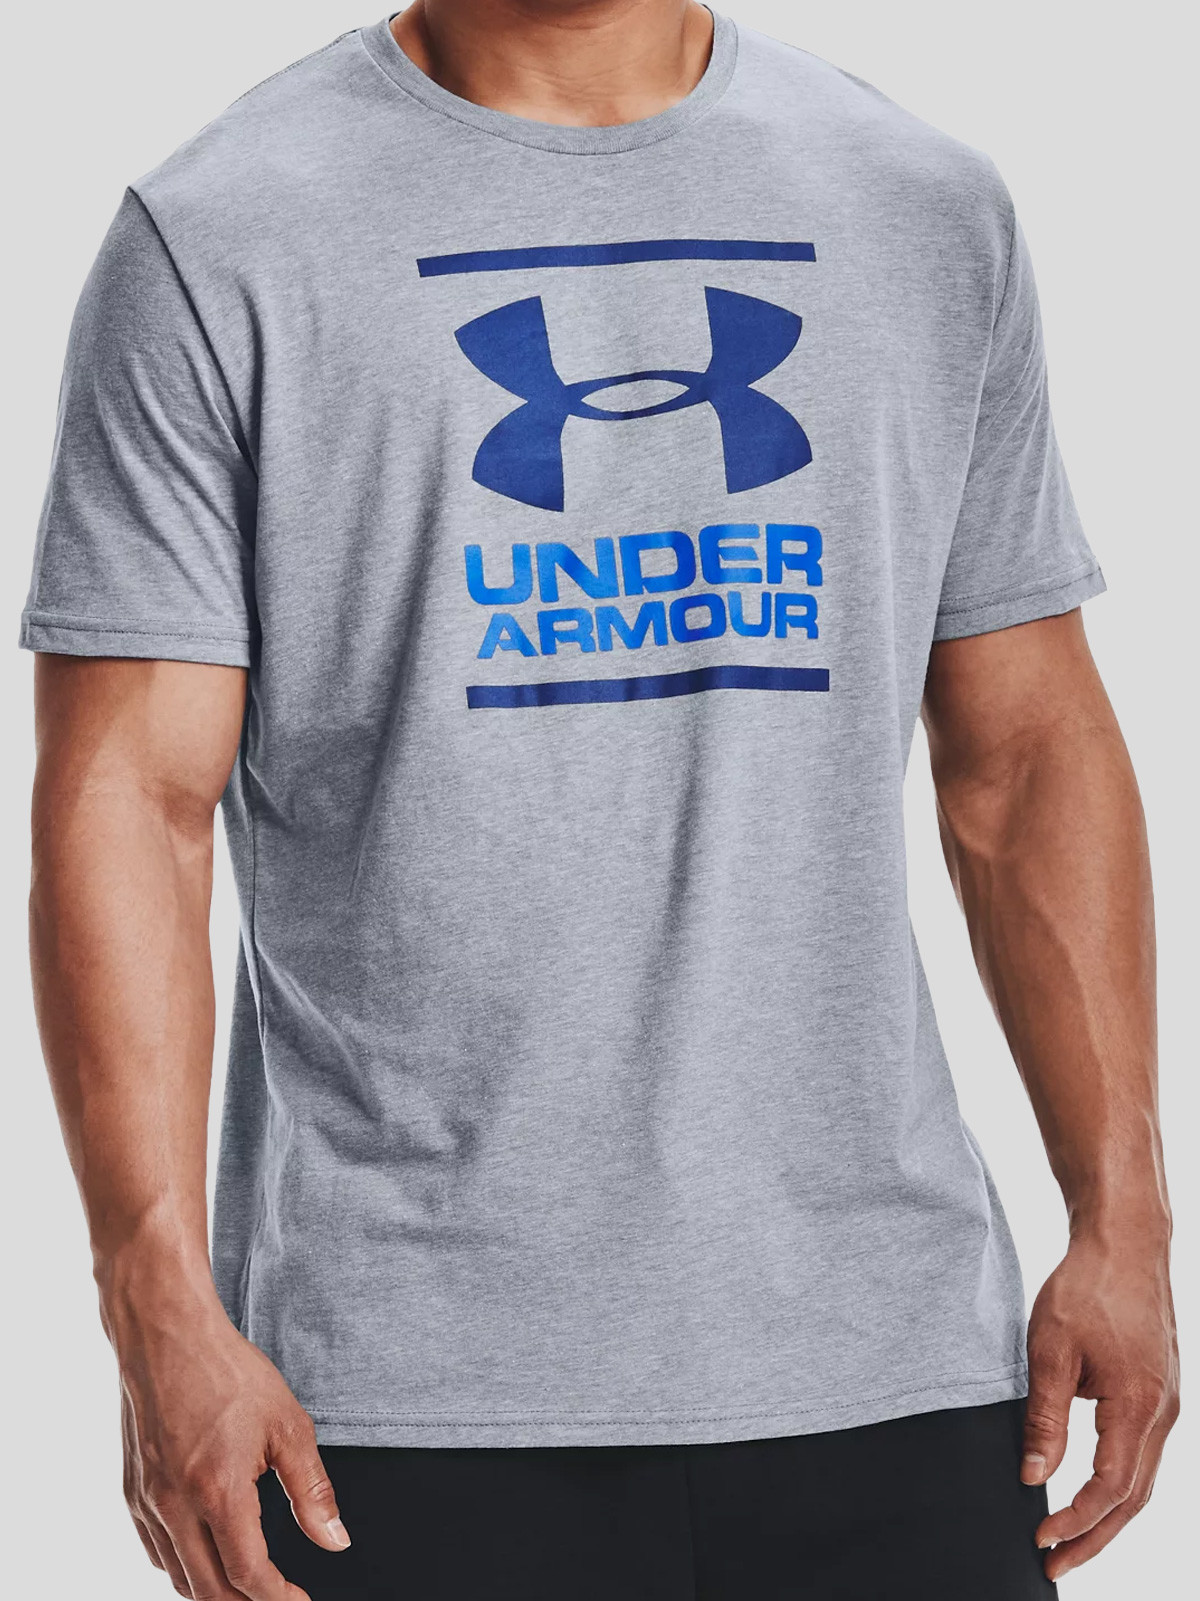 Tee-shirt Logo Under Armour Grande Taille homme grande taille